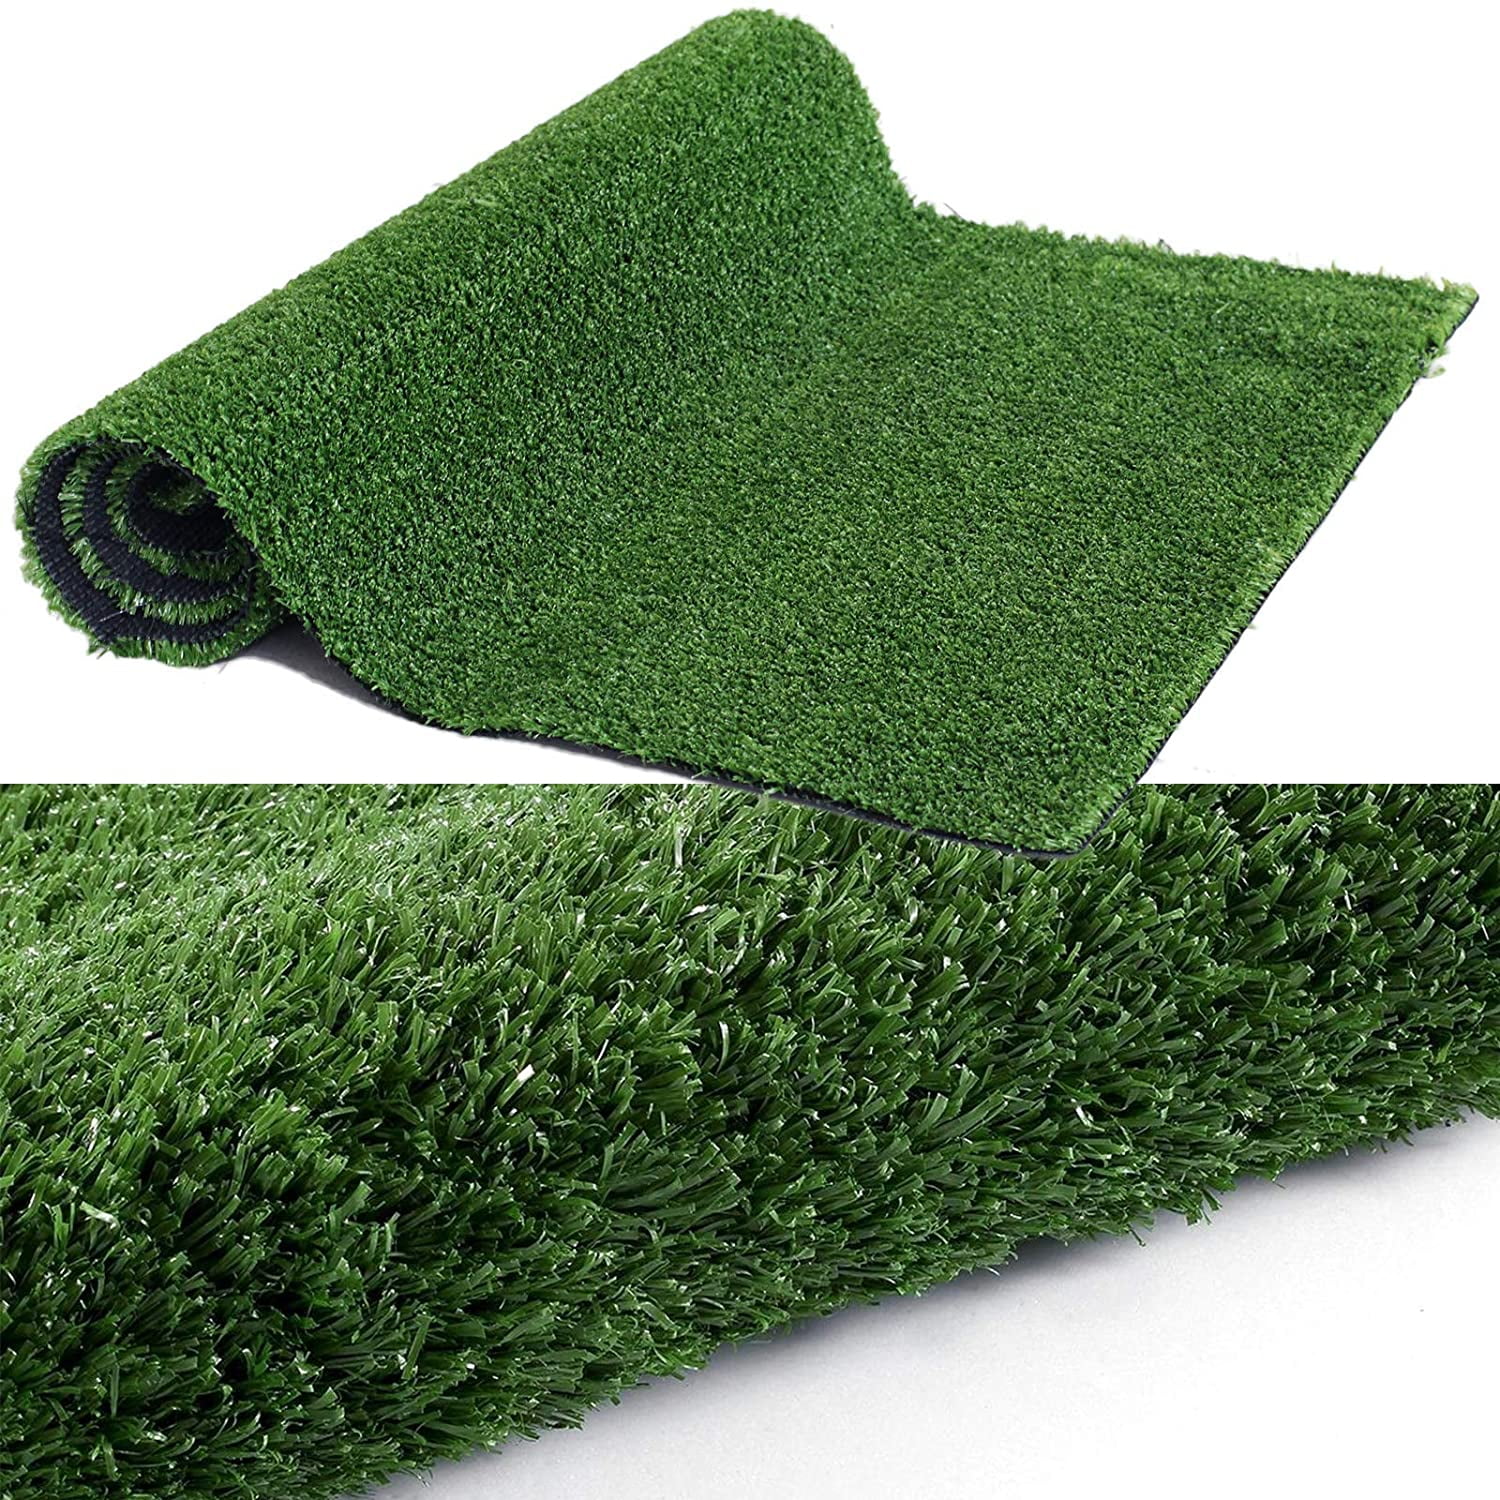 Details about   ARTIFICIAL GRASS QUALITY ASTRO TURF CHEAP REALISTIC NATURAL 15MM GREEN NEW 